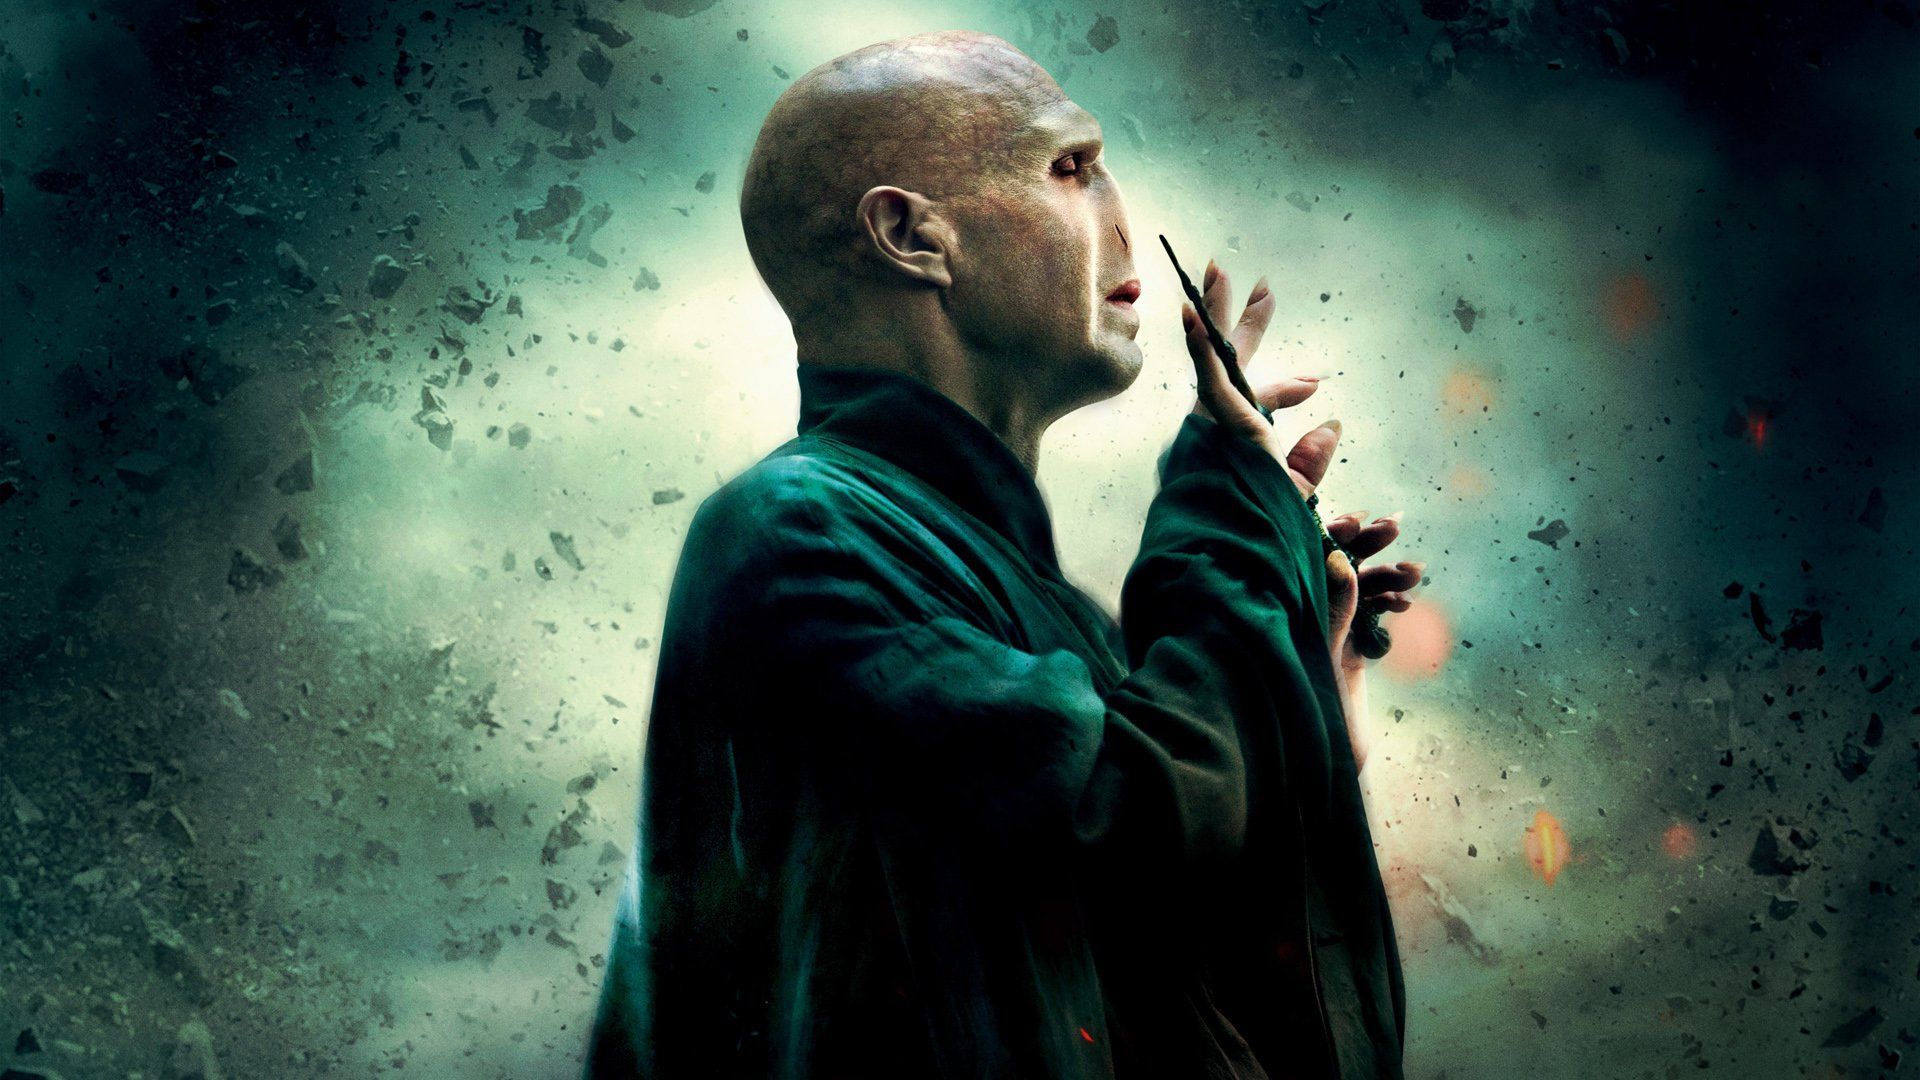 Lord Voldemort Wizard Harry Potter Harry Potter And The Deathly Hallows Movie Poster The Dark Lord T 1920x1080